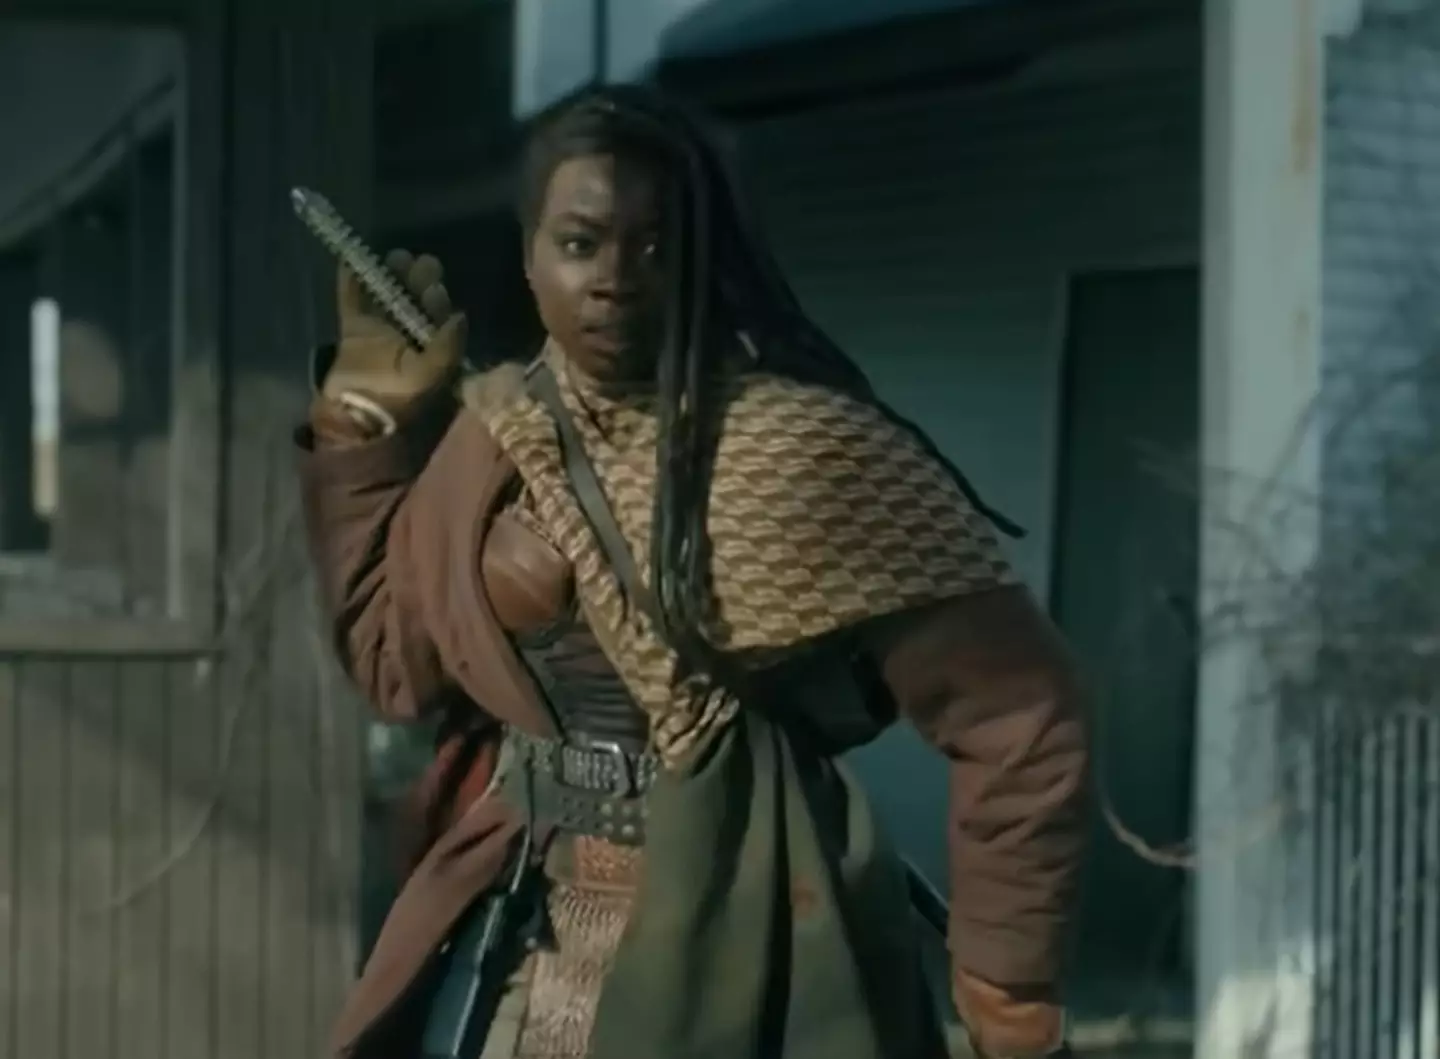 Michonne is tracking down Rick, and you'd better believe she's going to find him.